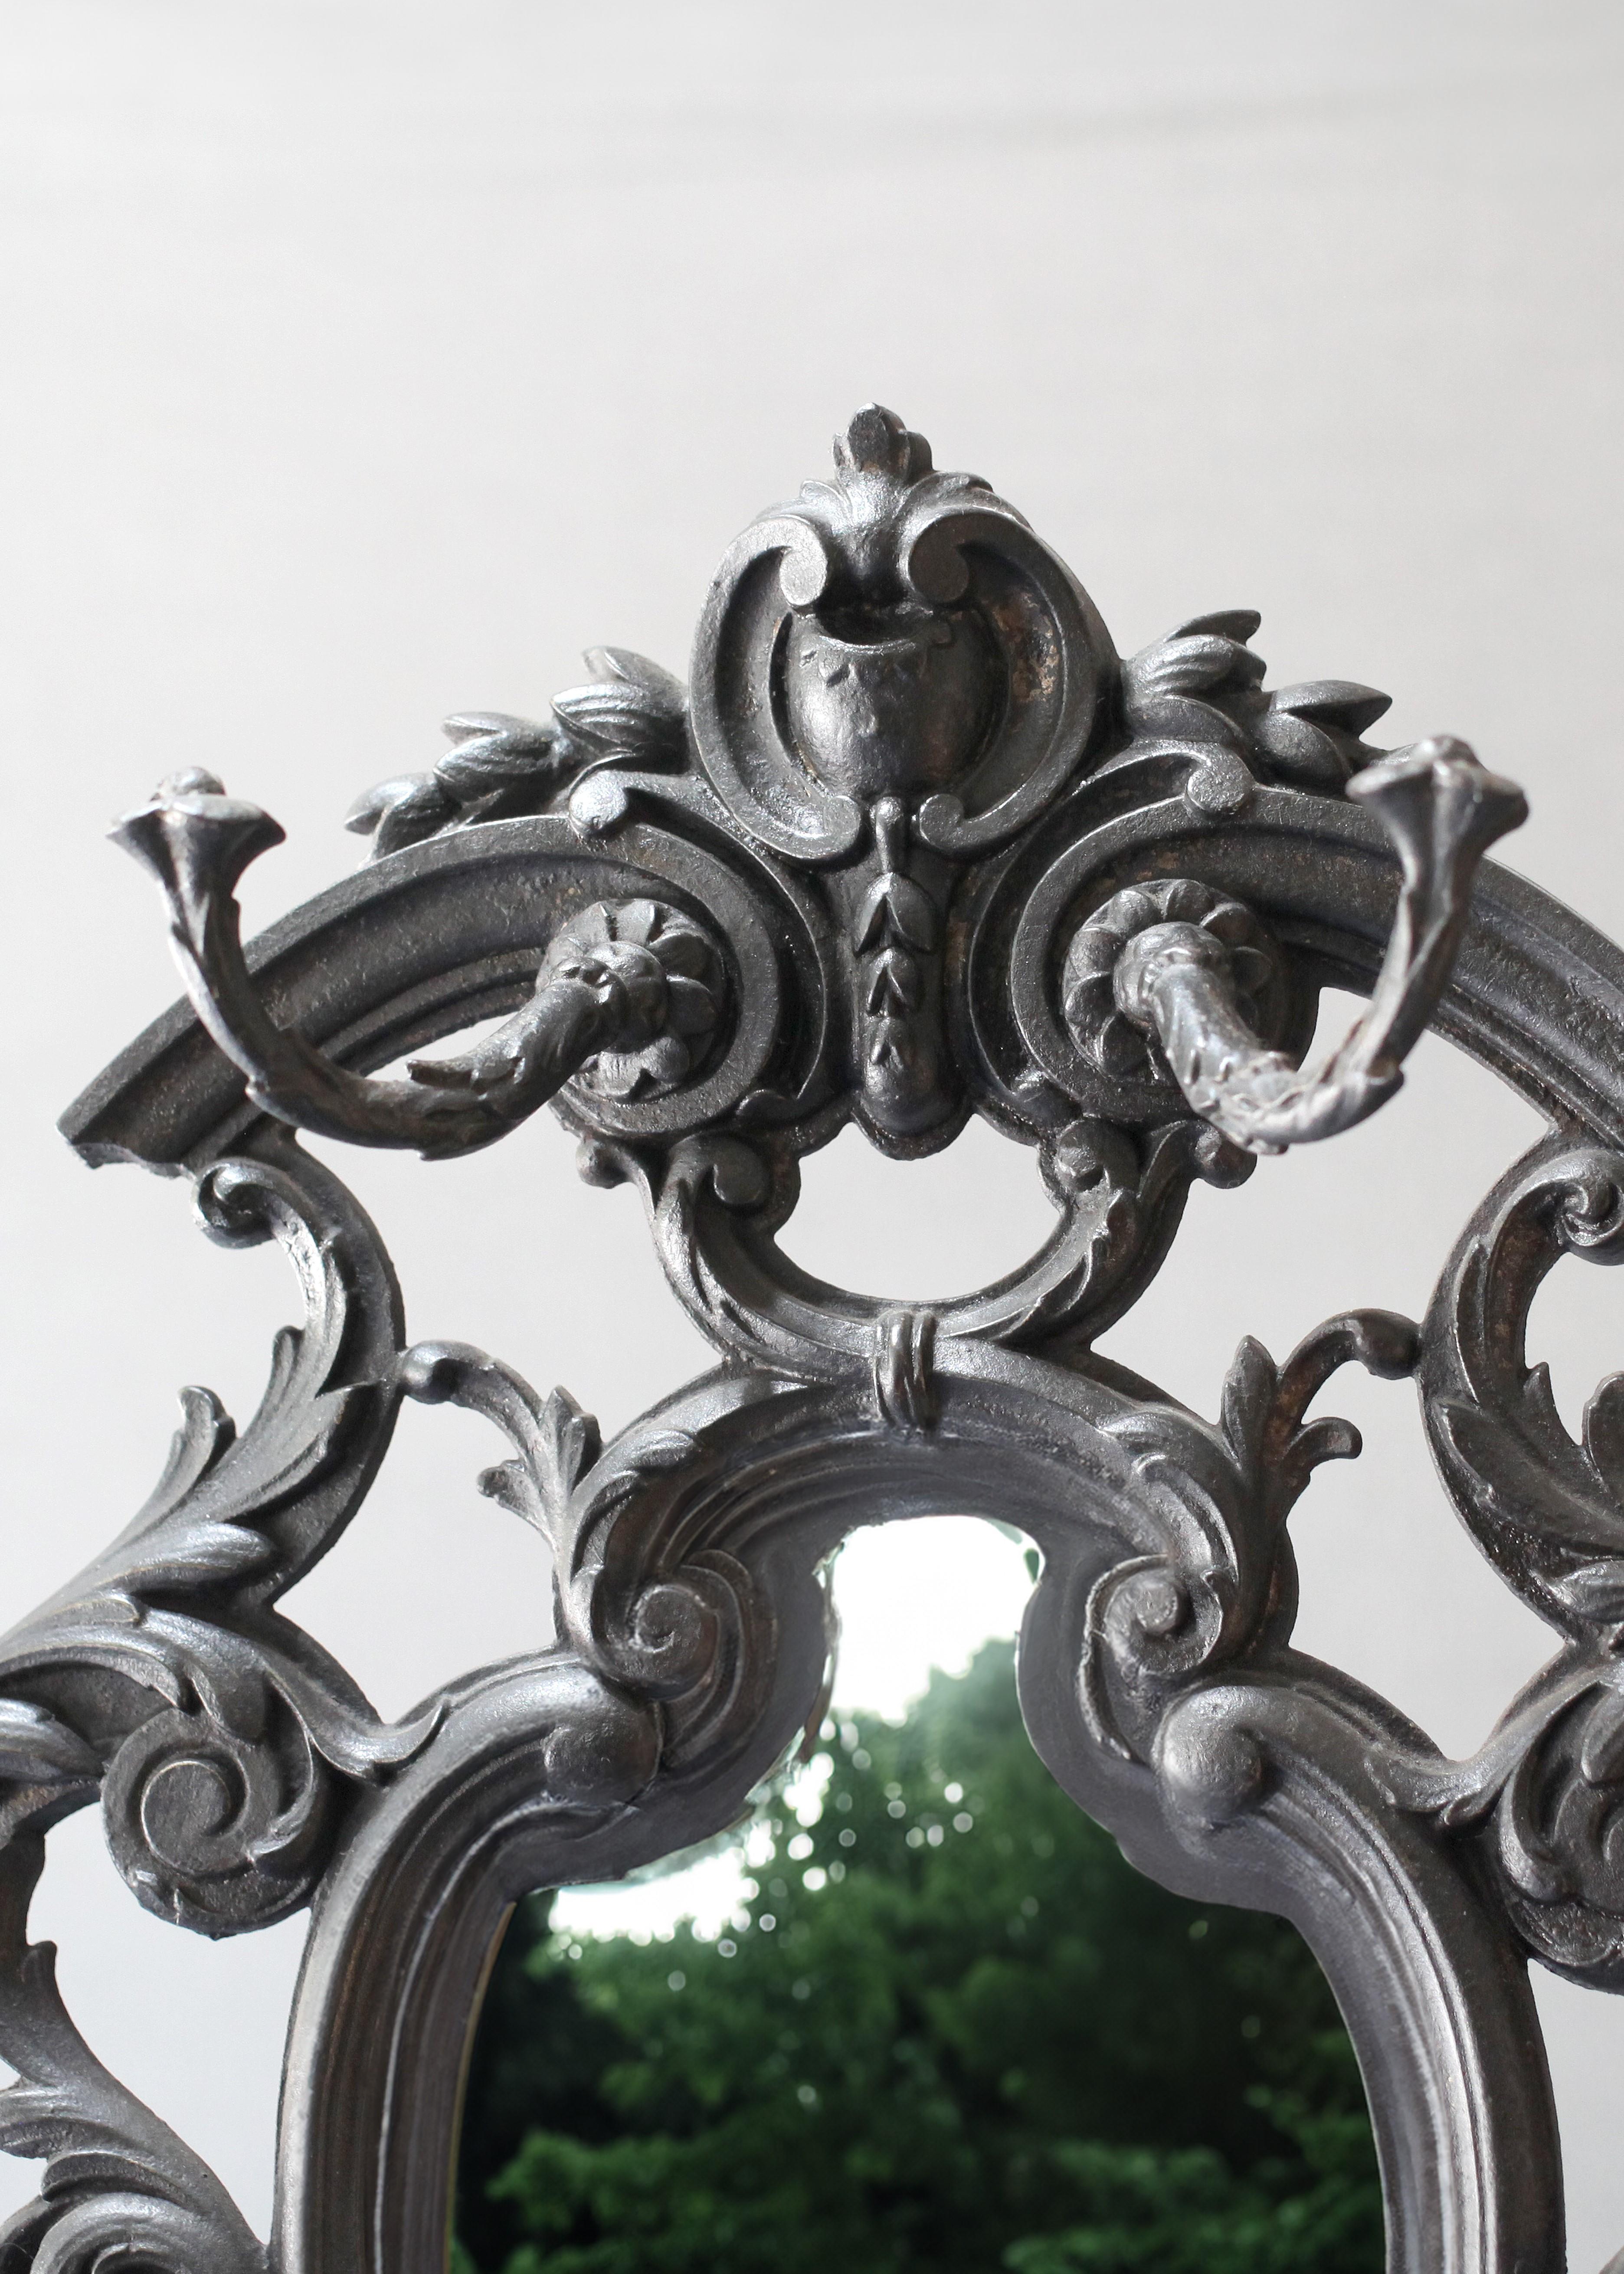 Emanating the spirit of the Art Nouveau movement, this French Cast Iron Hall Tree by Alfred Corneau is a captivating artifact from the turn of the 20th century. Expertly shaped with decorative details, the Hall Tree features an elegant mirror plate